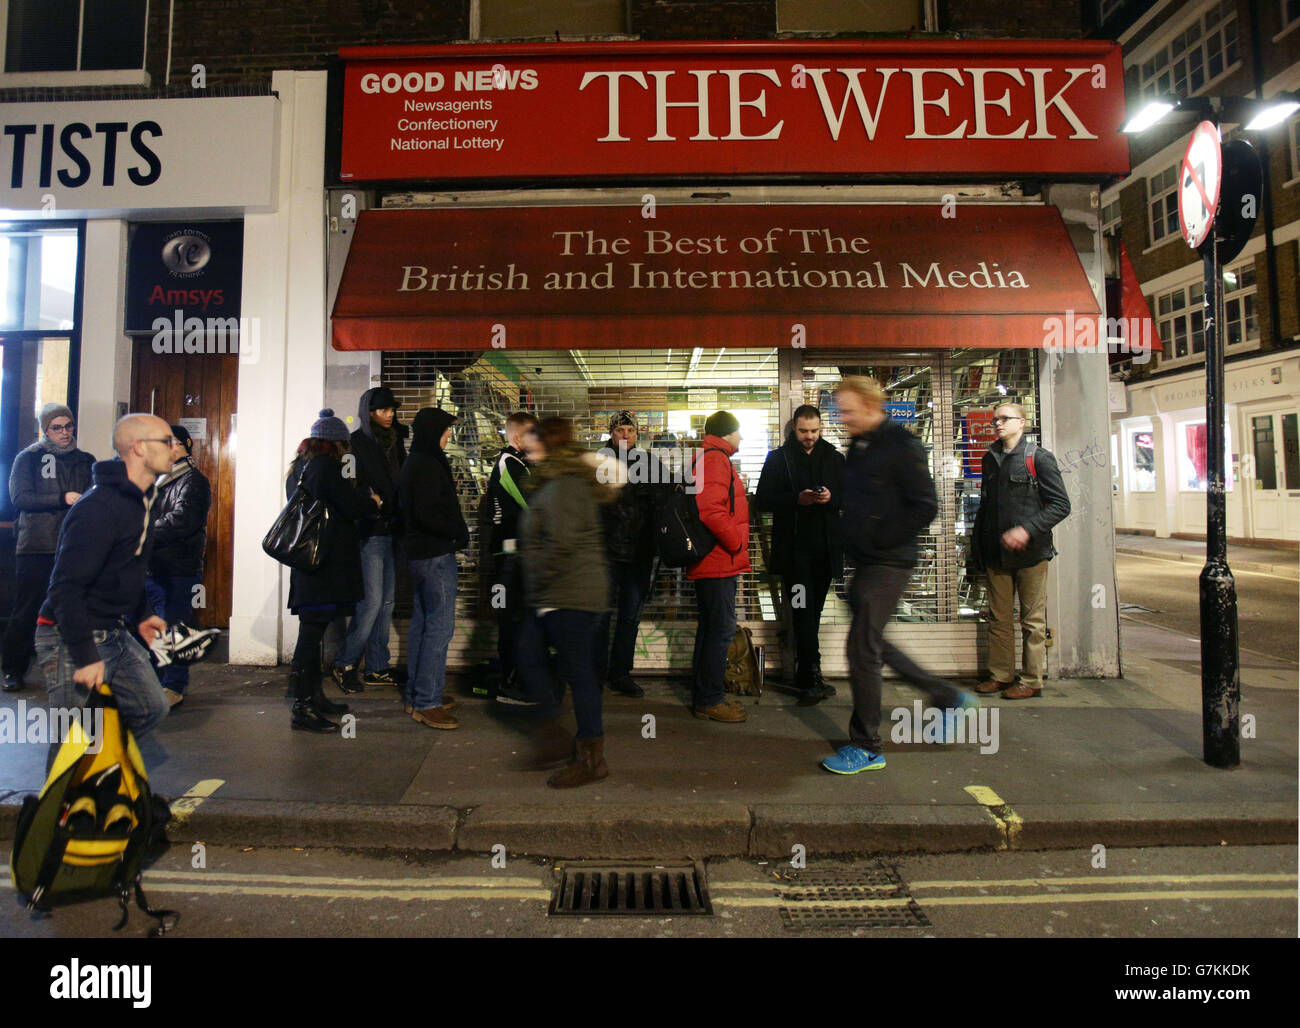 People queue outside Good News newsagents in Soho, London, waiting to buy a copy of French satirical magazine Charlie Hebdo. PRESS ASSOCIATION Photo. Picture date: Friday January 16, 2015. Photo credit should read: Yui Mok/PA Wire Stock Photo